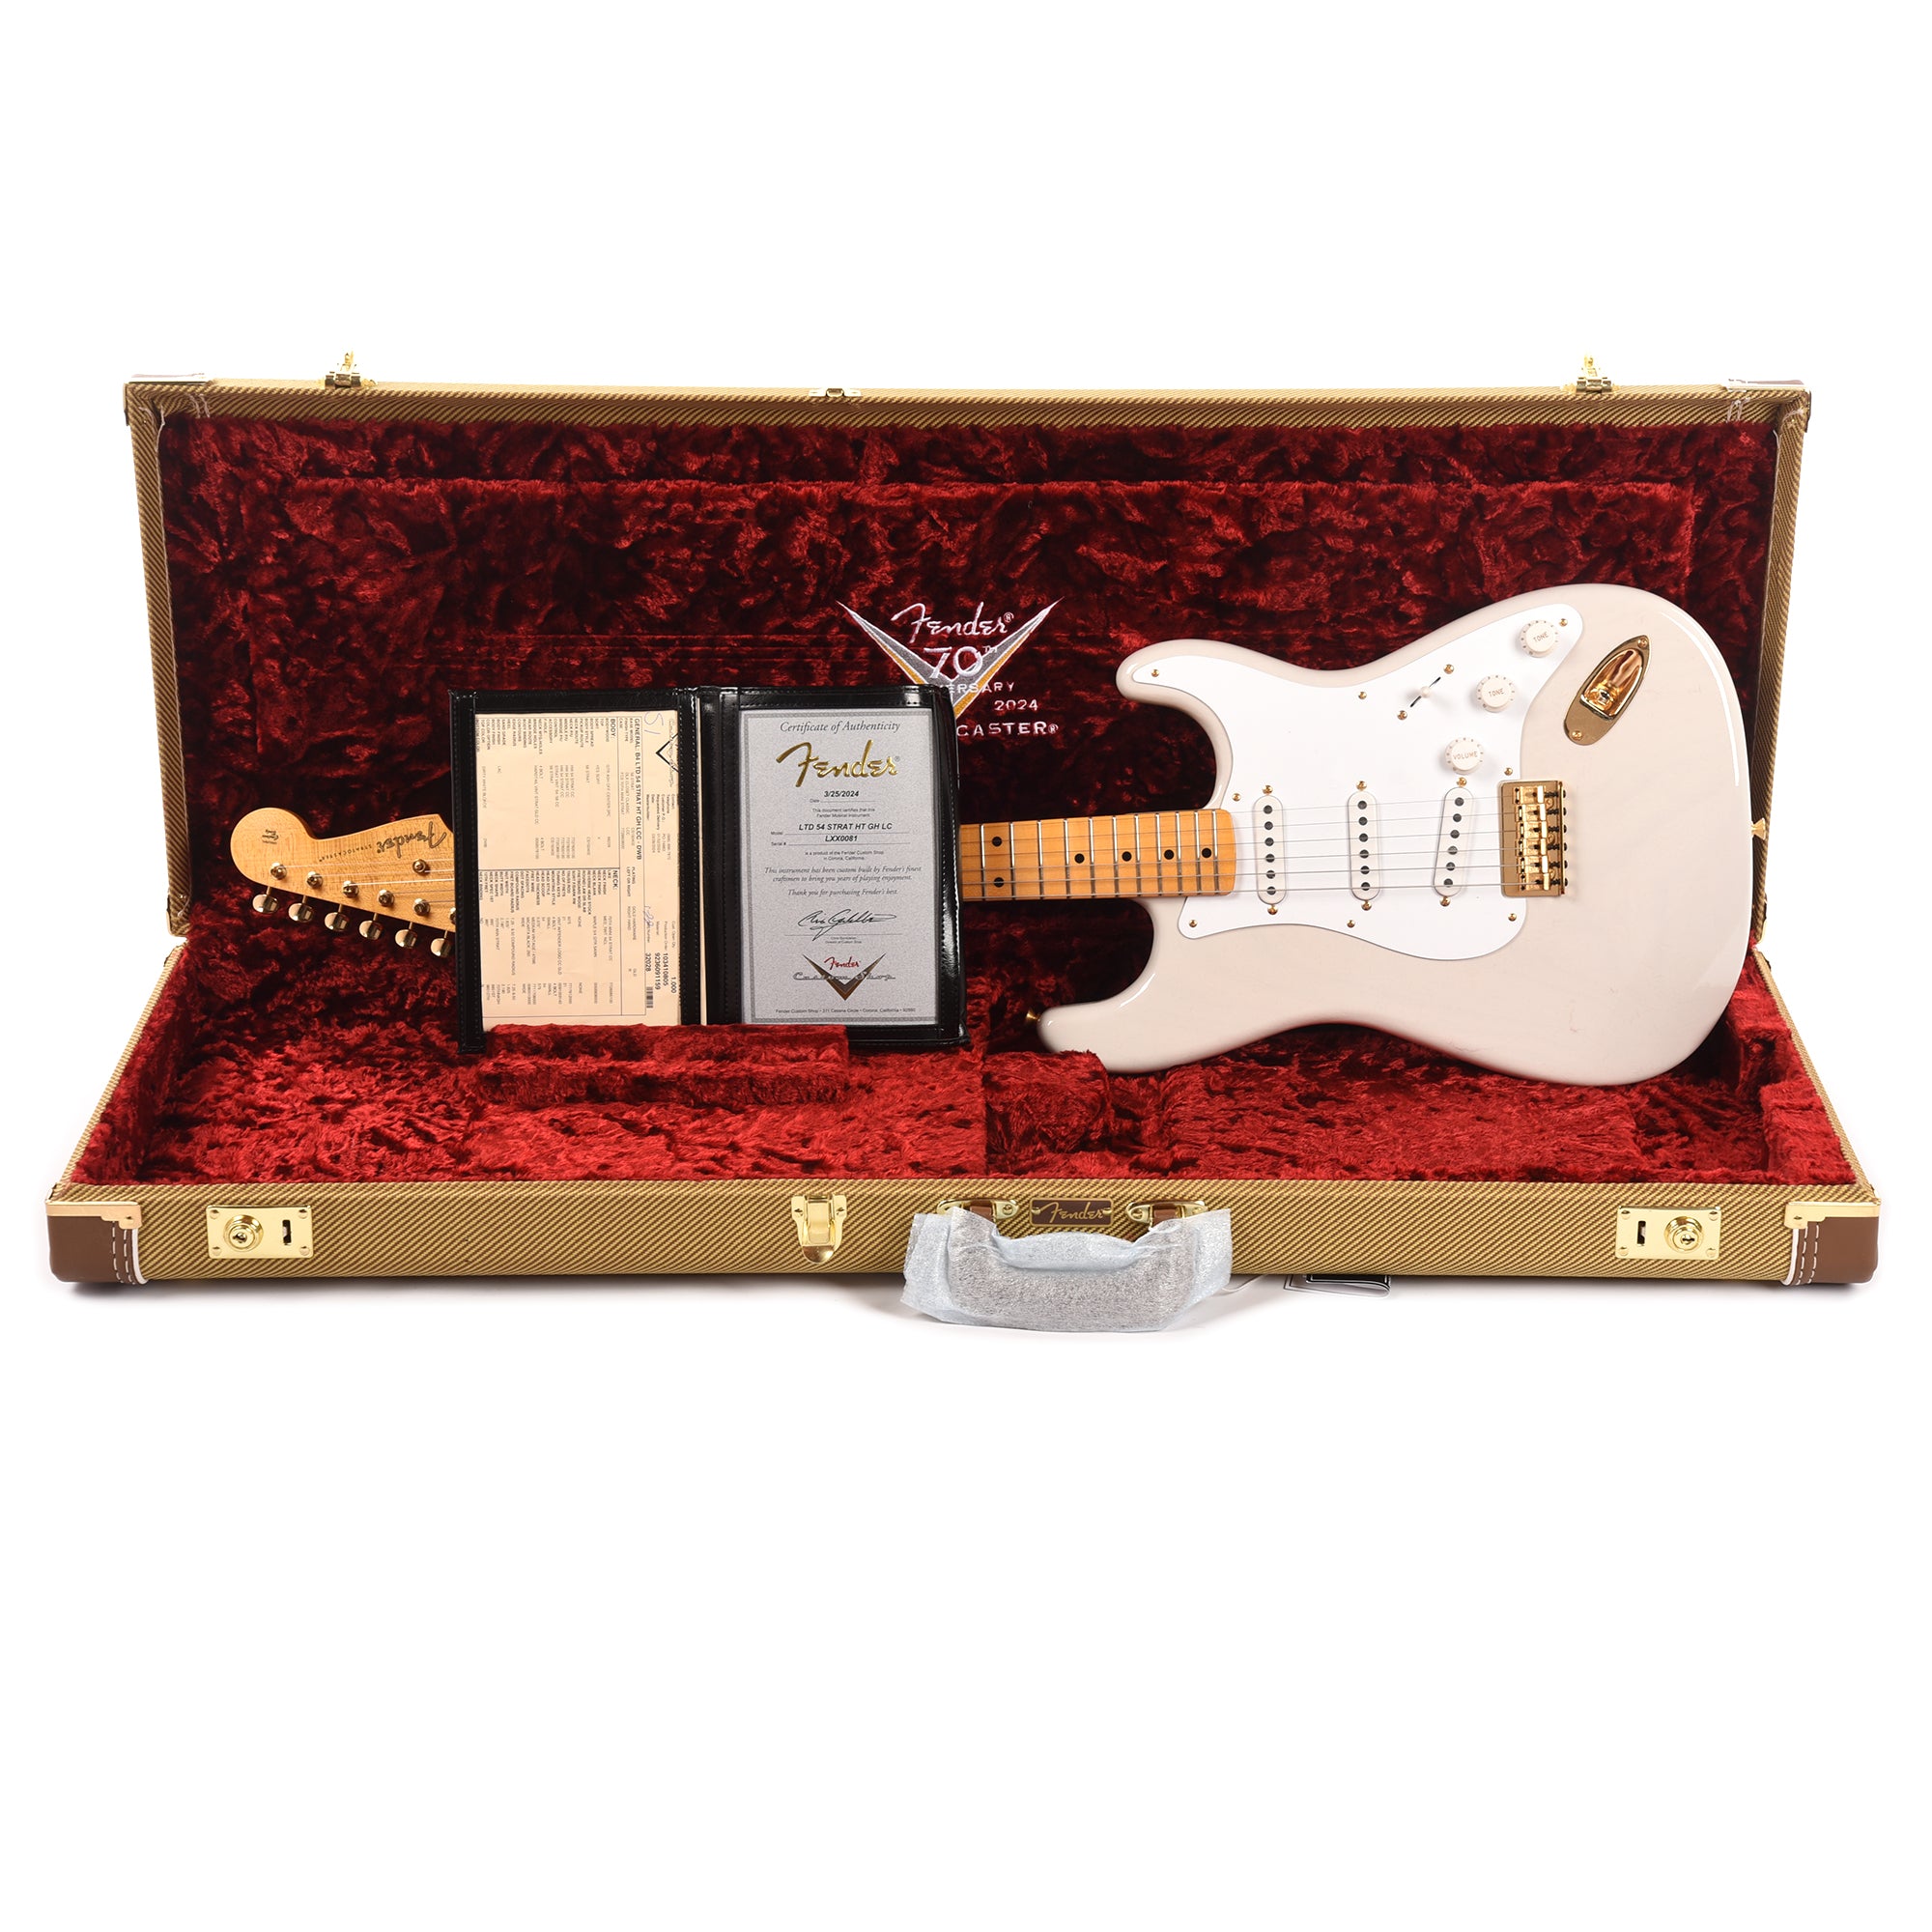 Fender Custom Shop Limited Edition '54 Hardtail Stratocaster Deluxe Closet Classic with Gold Hardware Dirty White Blonde